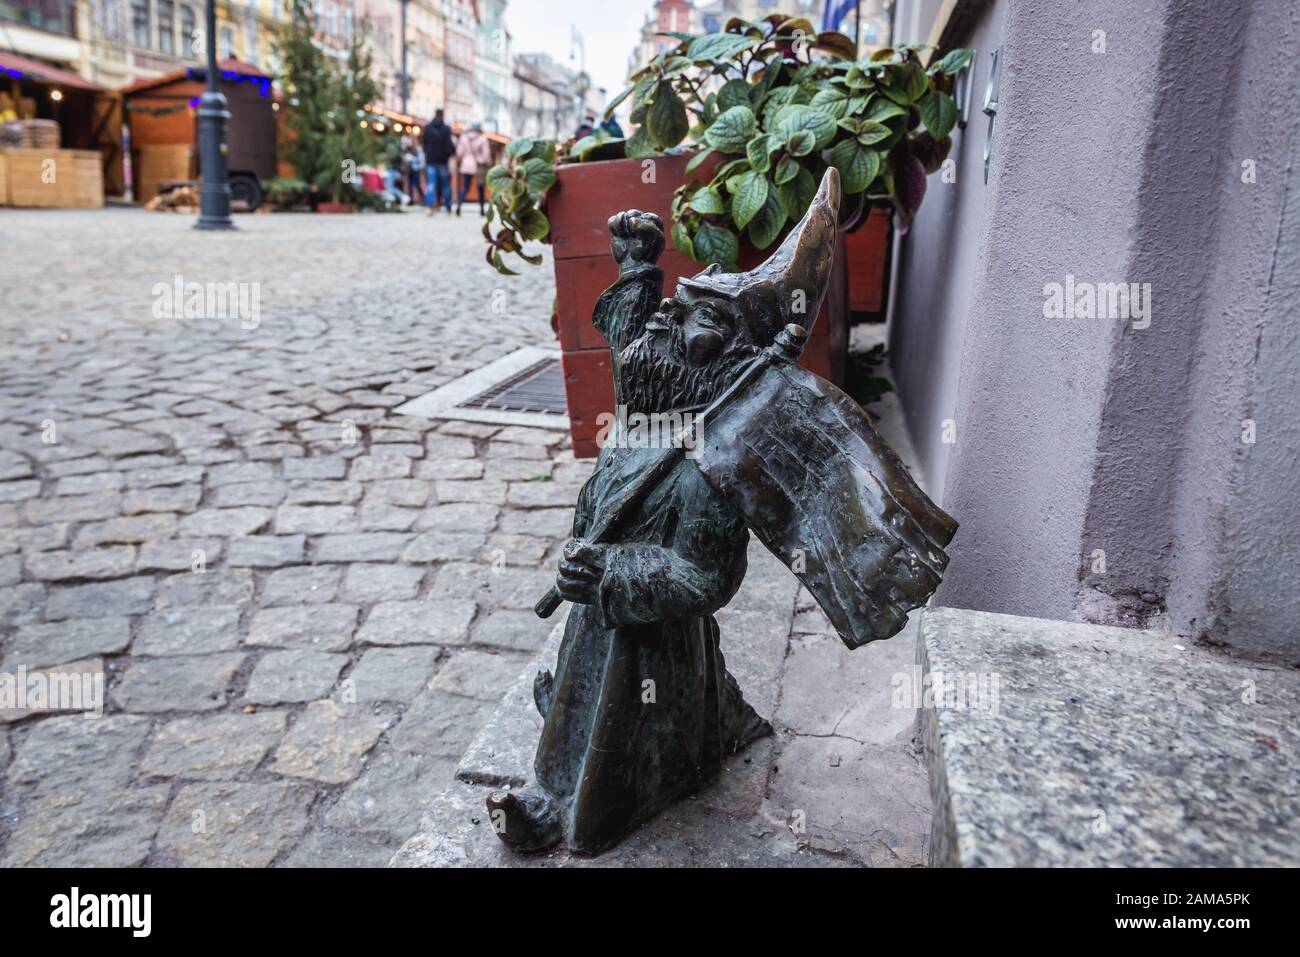 Figurine of dwarf called Przodownik - Foreman in front of PRL bar on the Old Town Market Square of Wroclaw in Silesia region of Poland Stock Photo